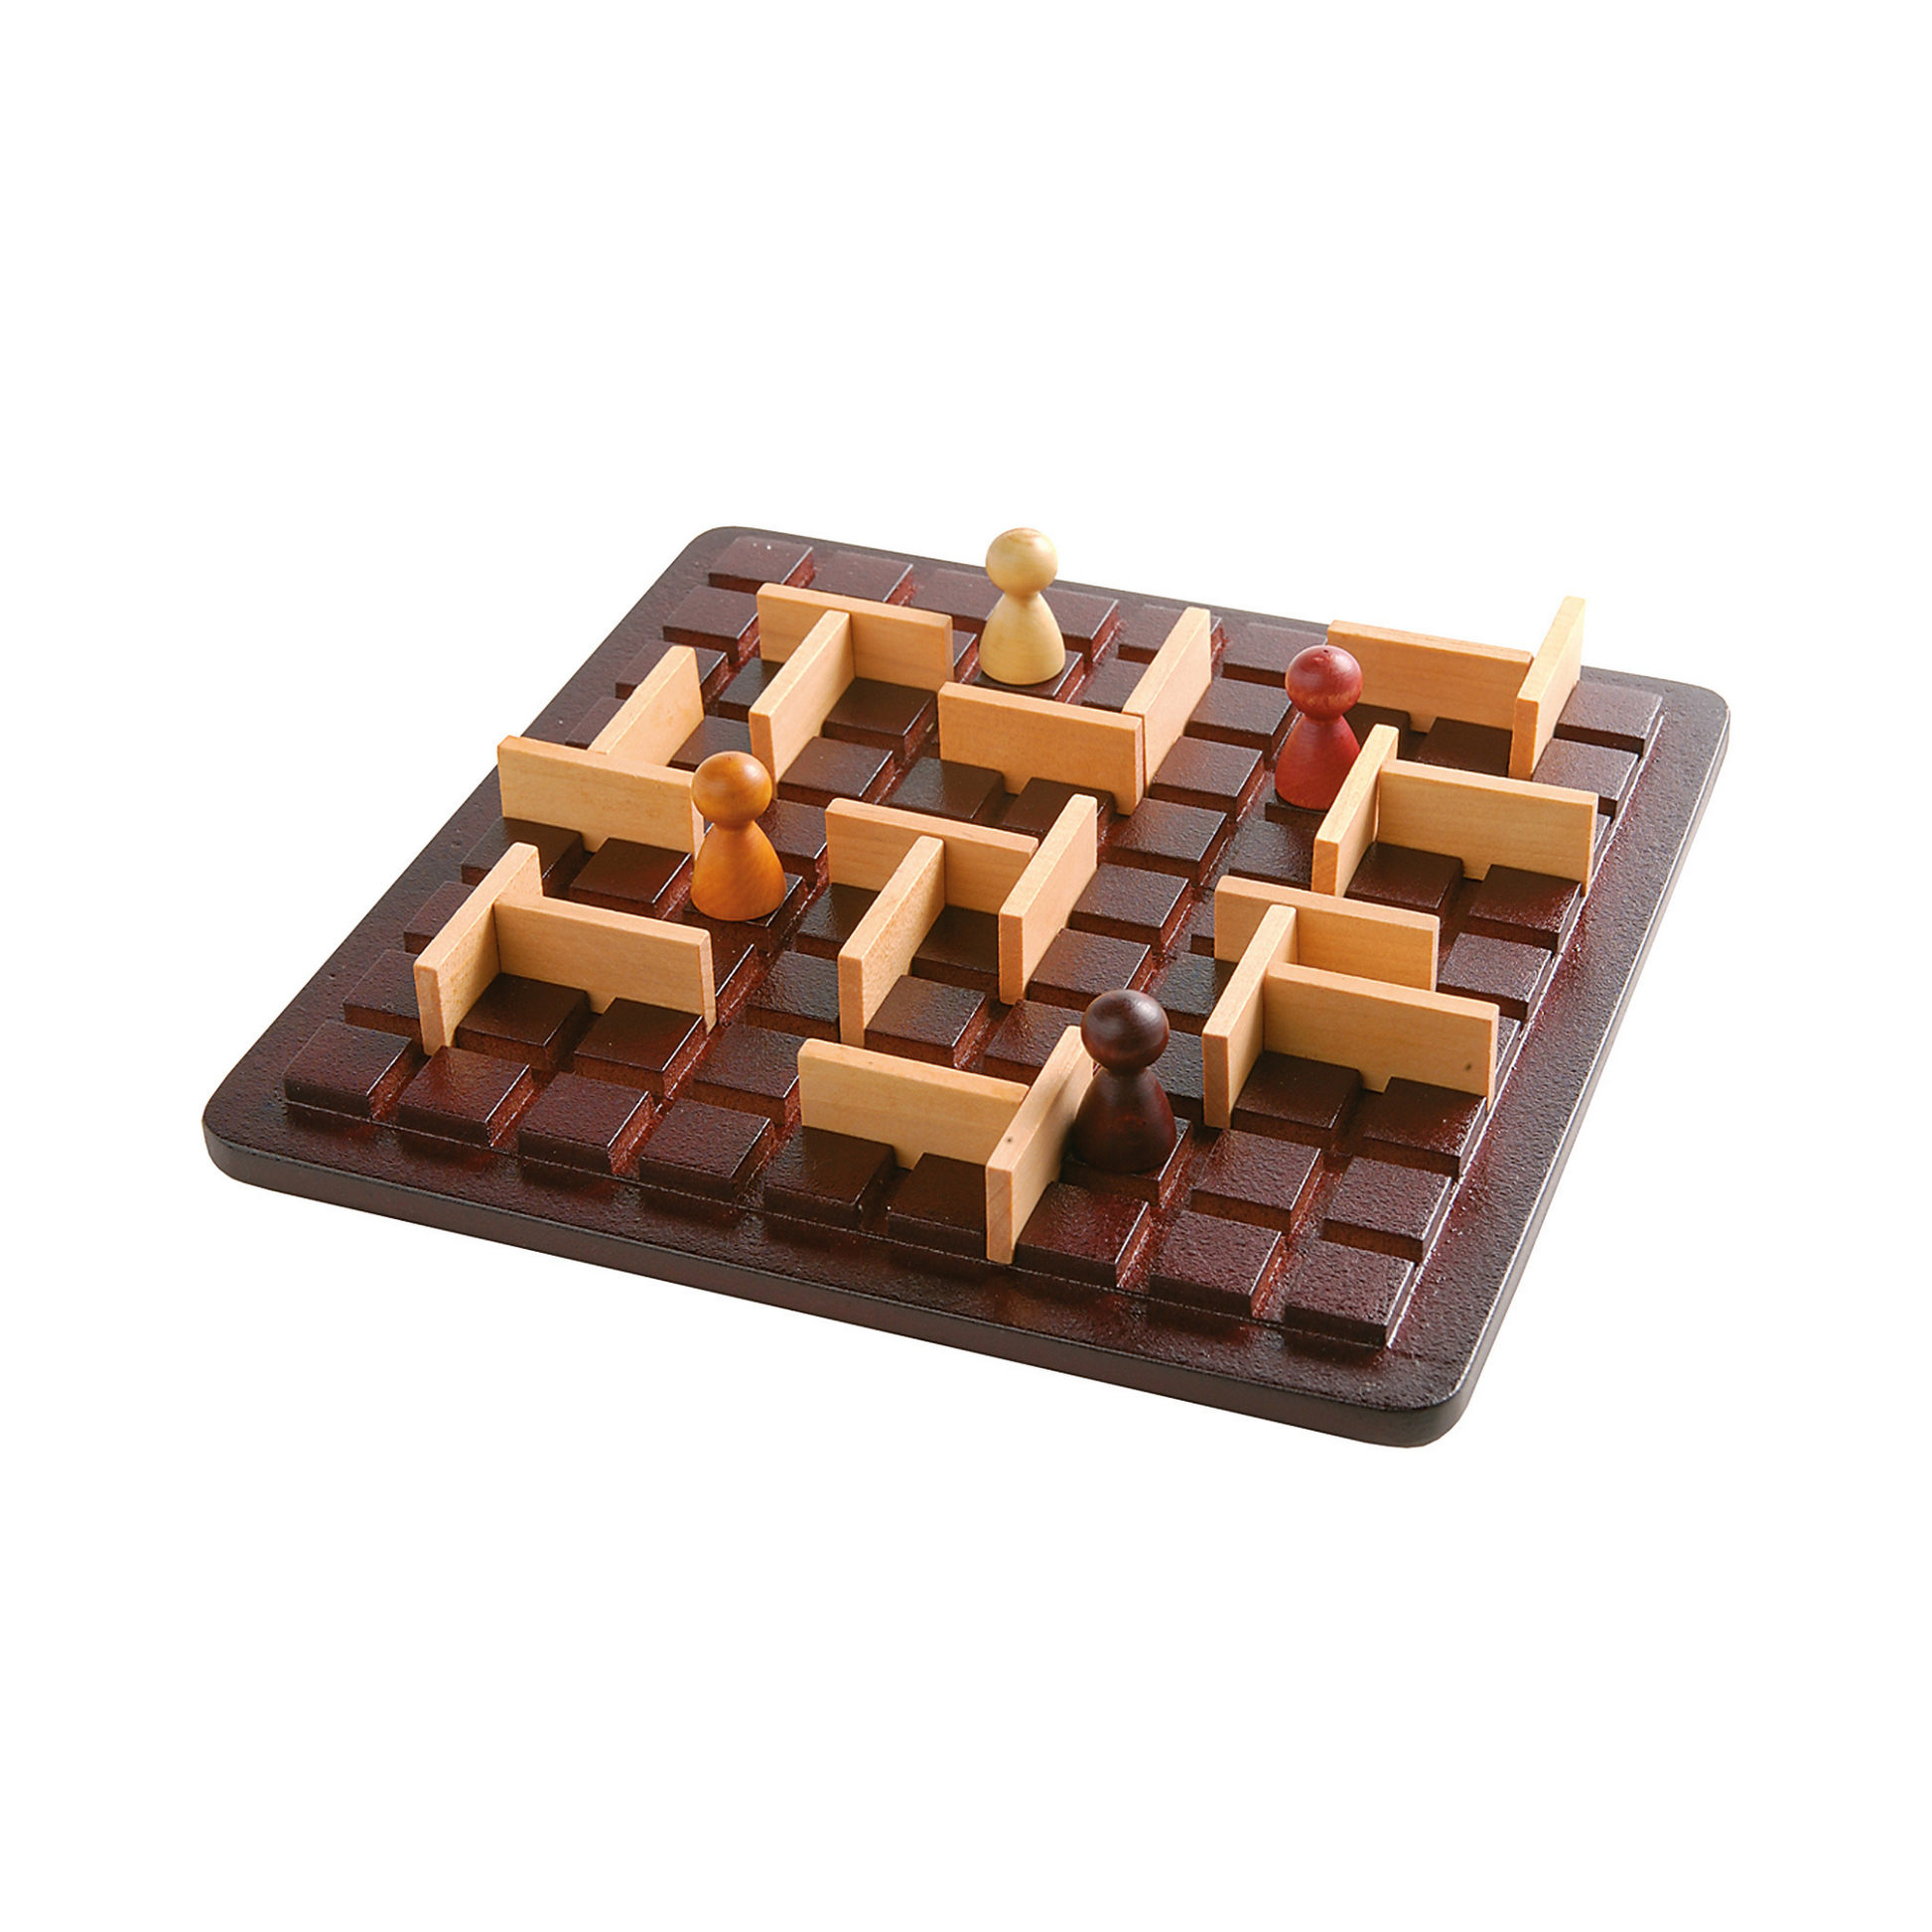 Gigamic – Hachette Boardgames US